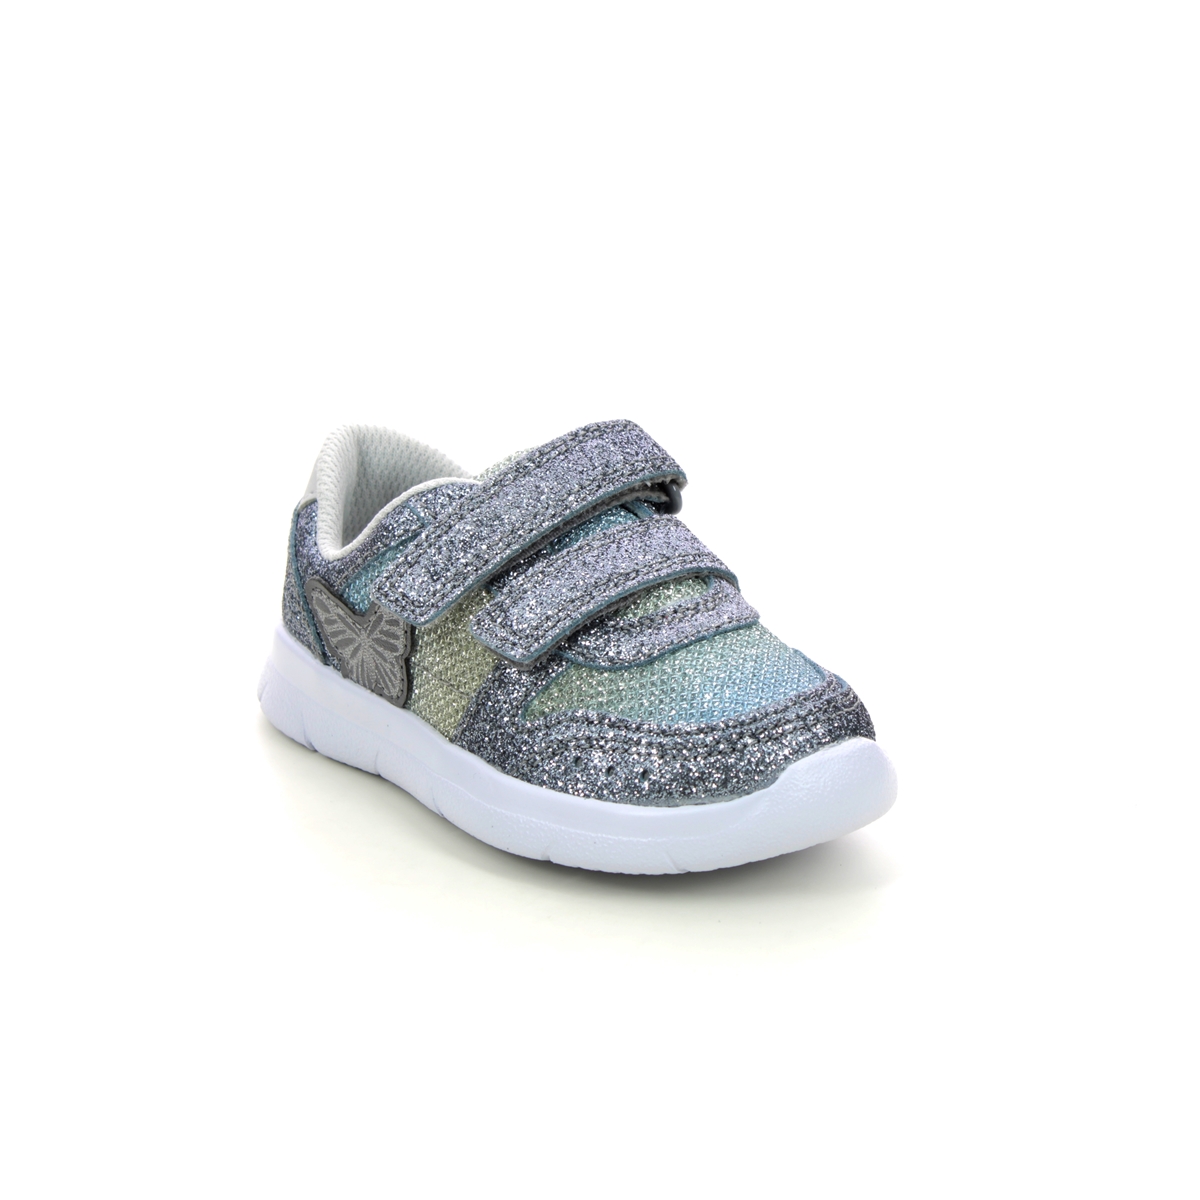 Clarks Ath Wing T Metallic Kids Toddler Girls Trainers 623197G In Size 9 In Plain Metallic G Width Fitting For kids